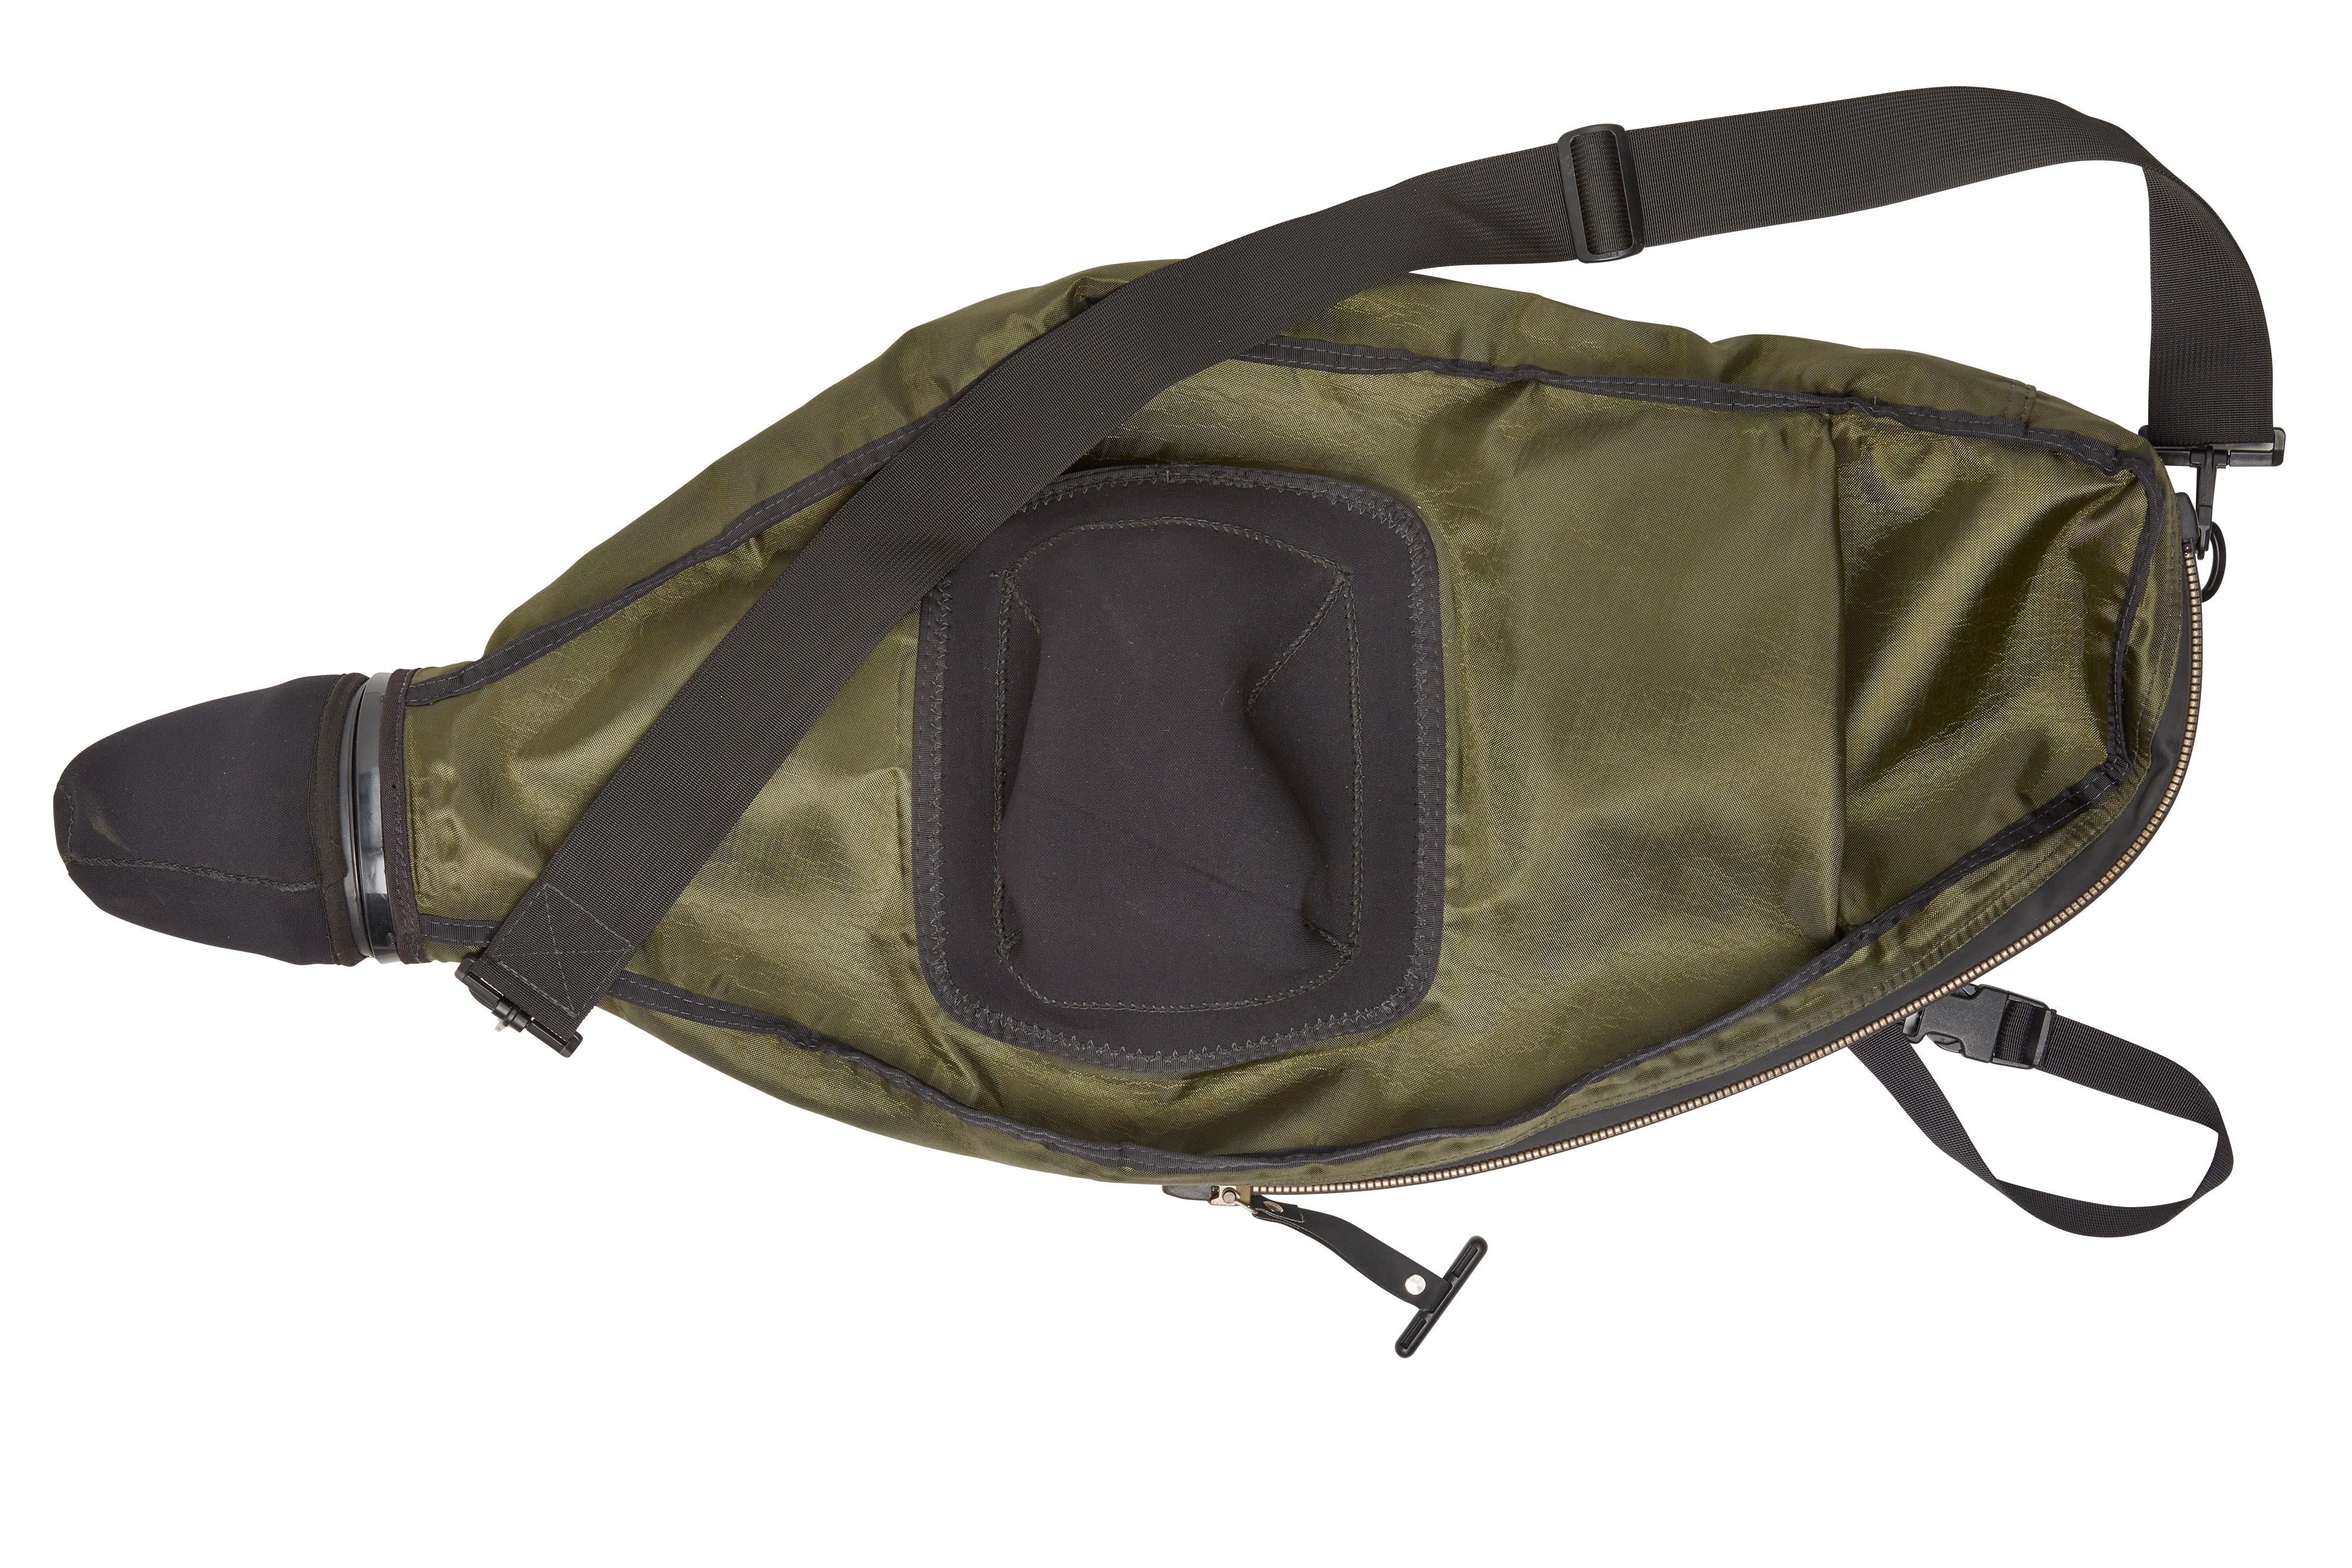 SHOOT THROUGH WATERPROOF BAG - WITH ZIP REPLACEABLE END - DiveDUI Military